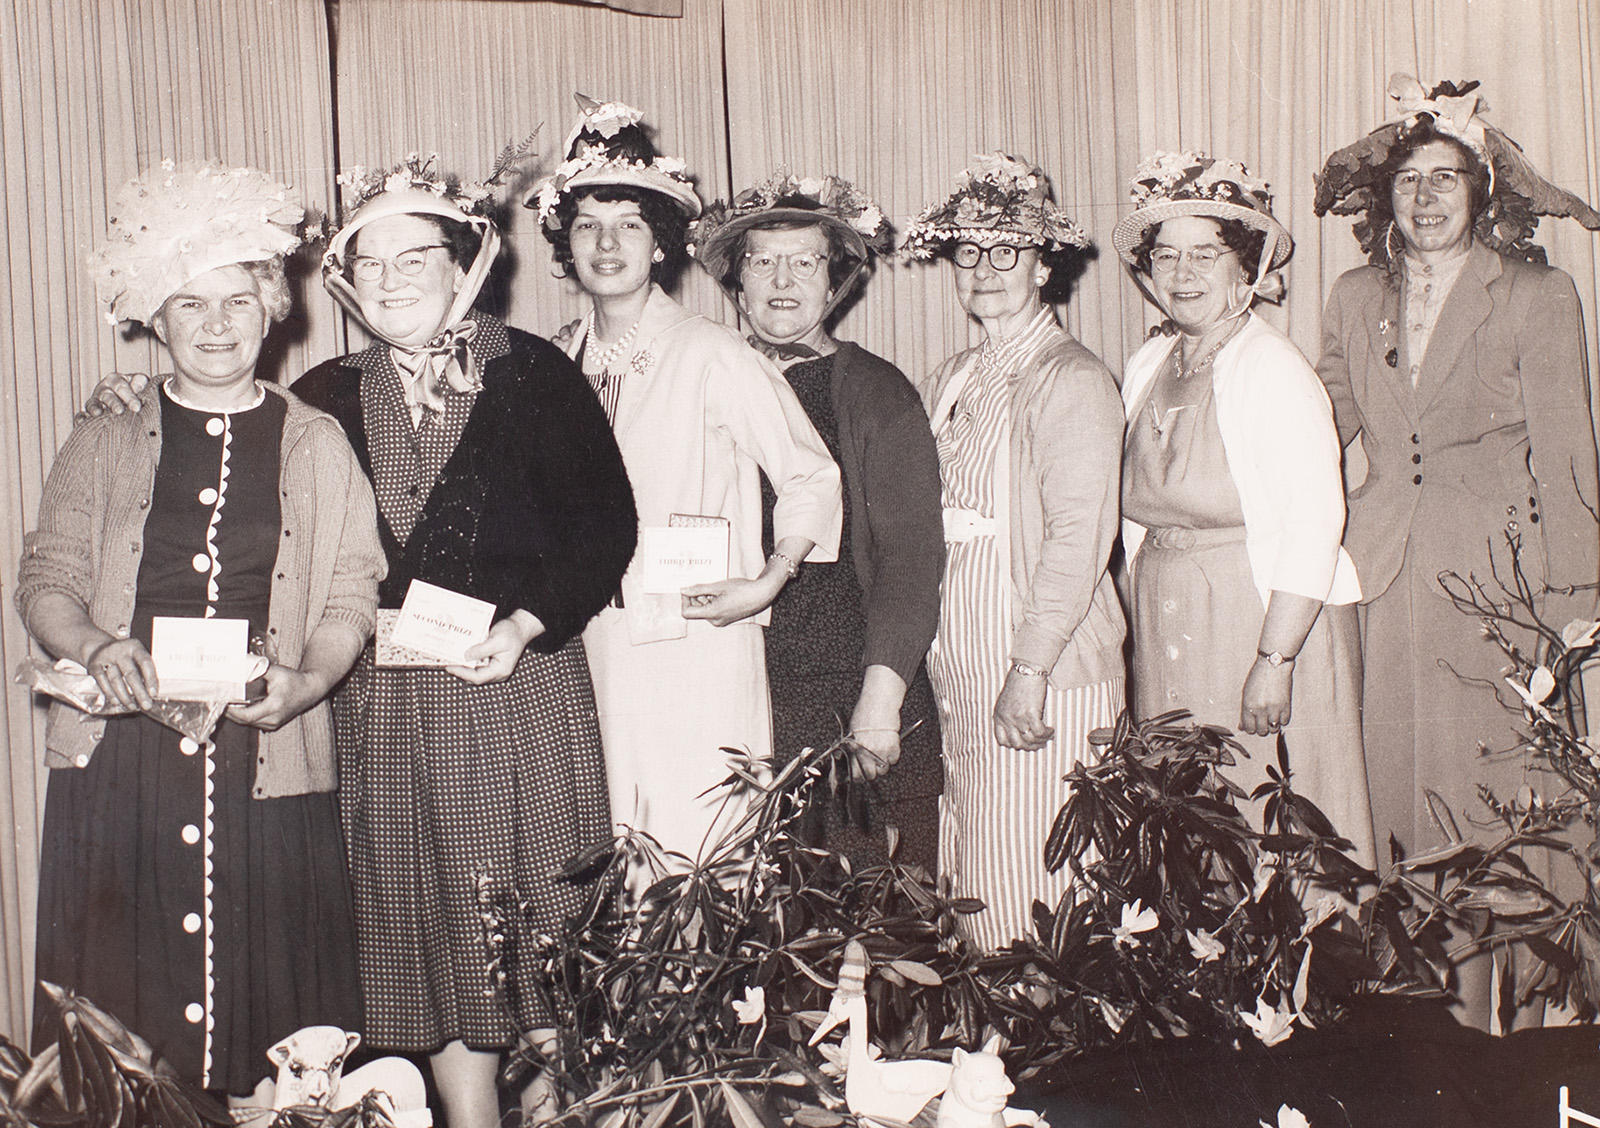 Photograph of named persons at the Easter Bonnet Parade